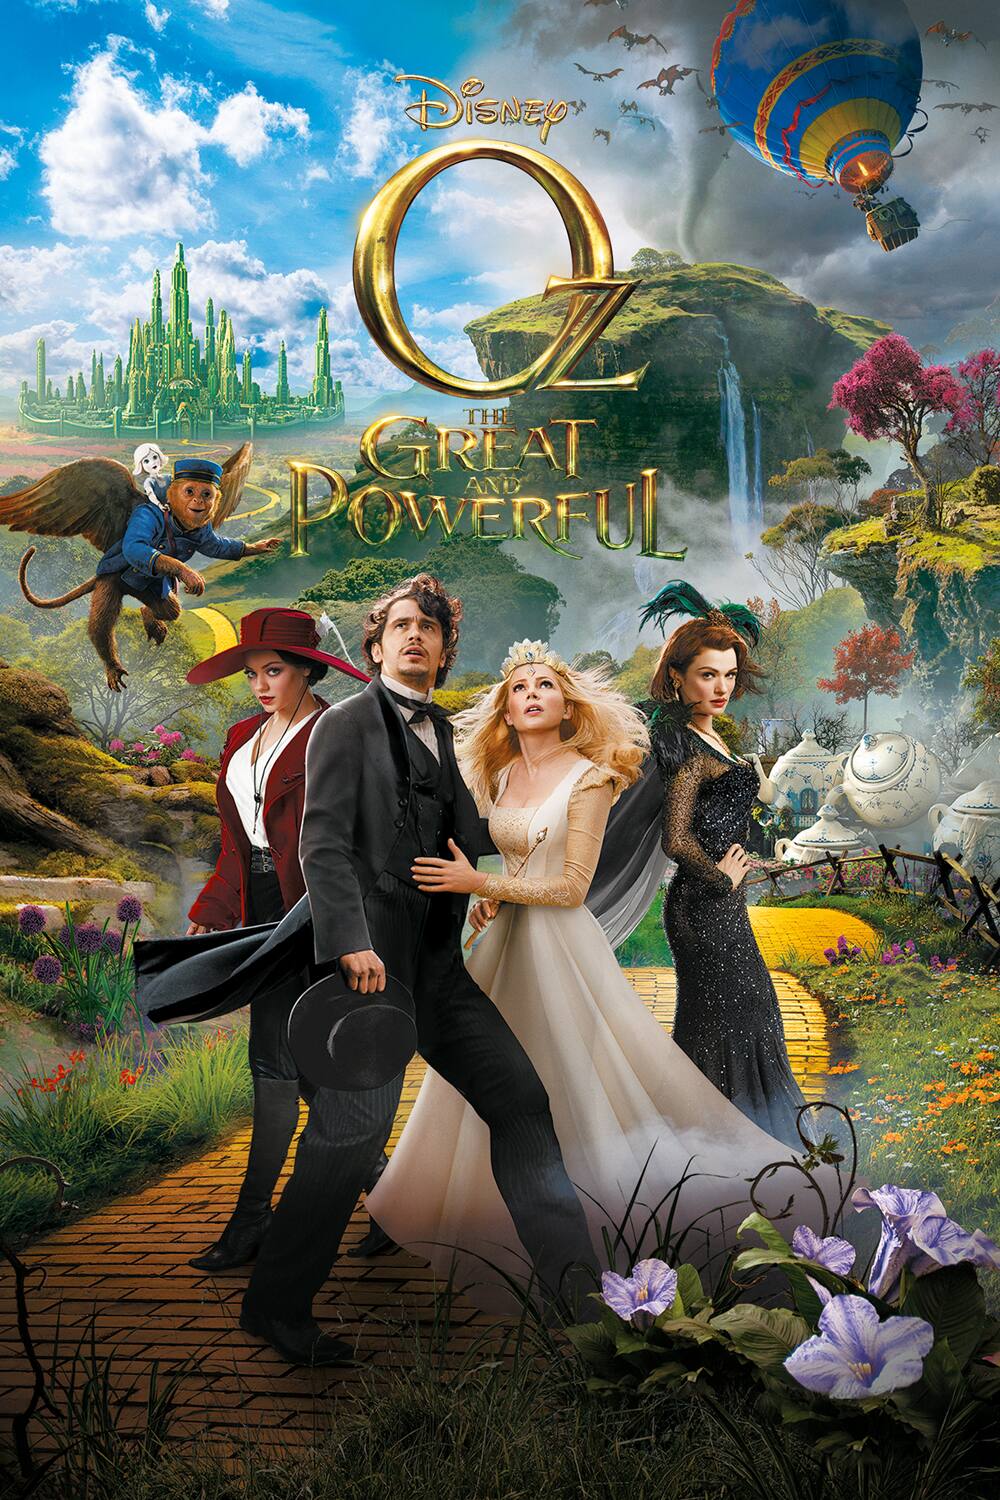 oz the great and powerful full movie free youtube